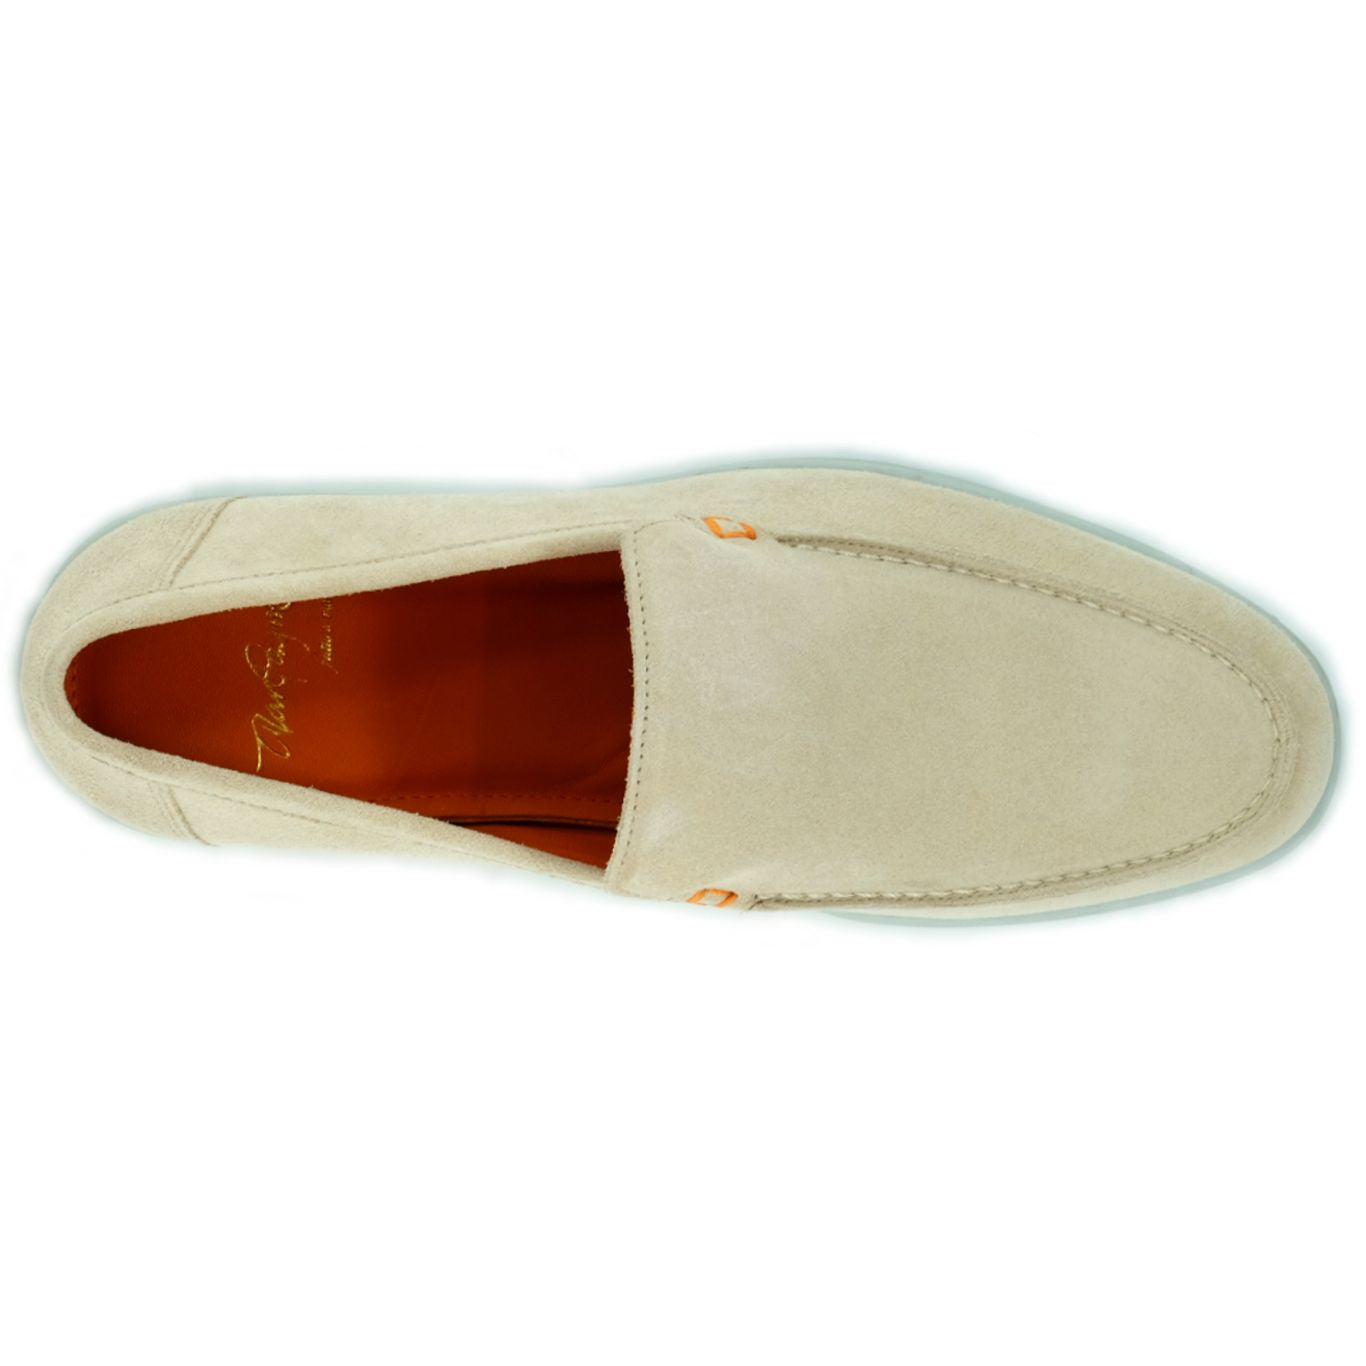 Rio Casual Suede Loafer in Sand by Alan Payne Footwear